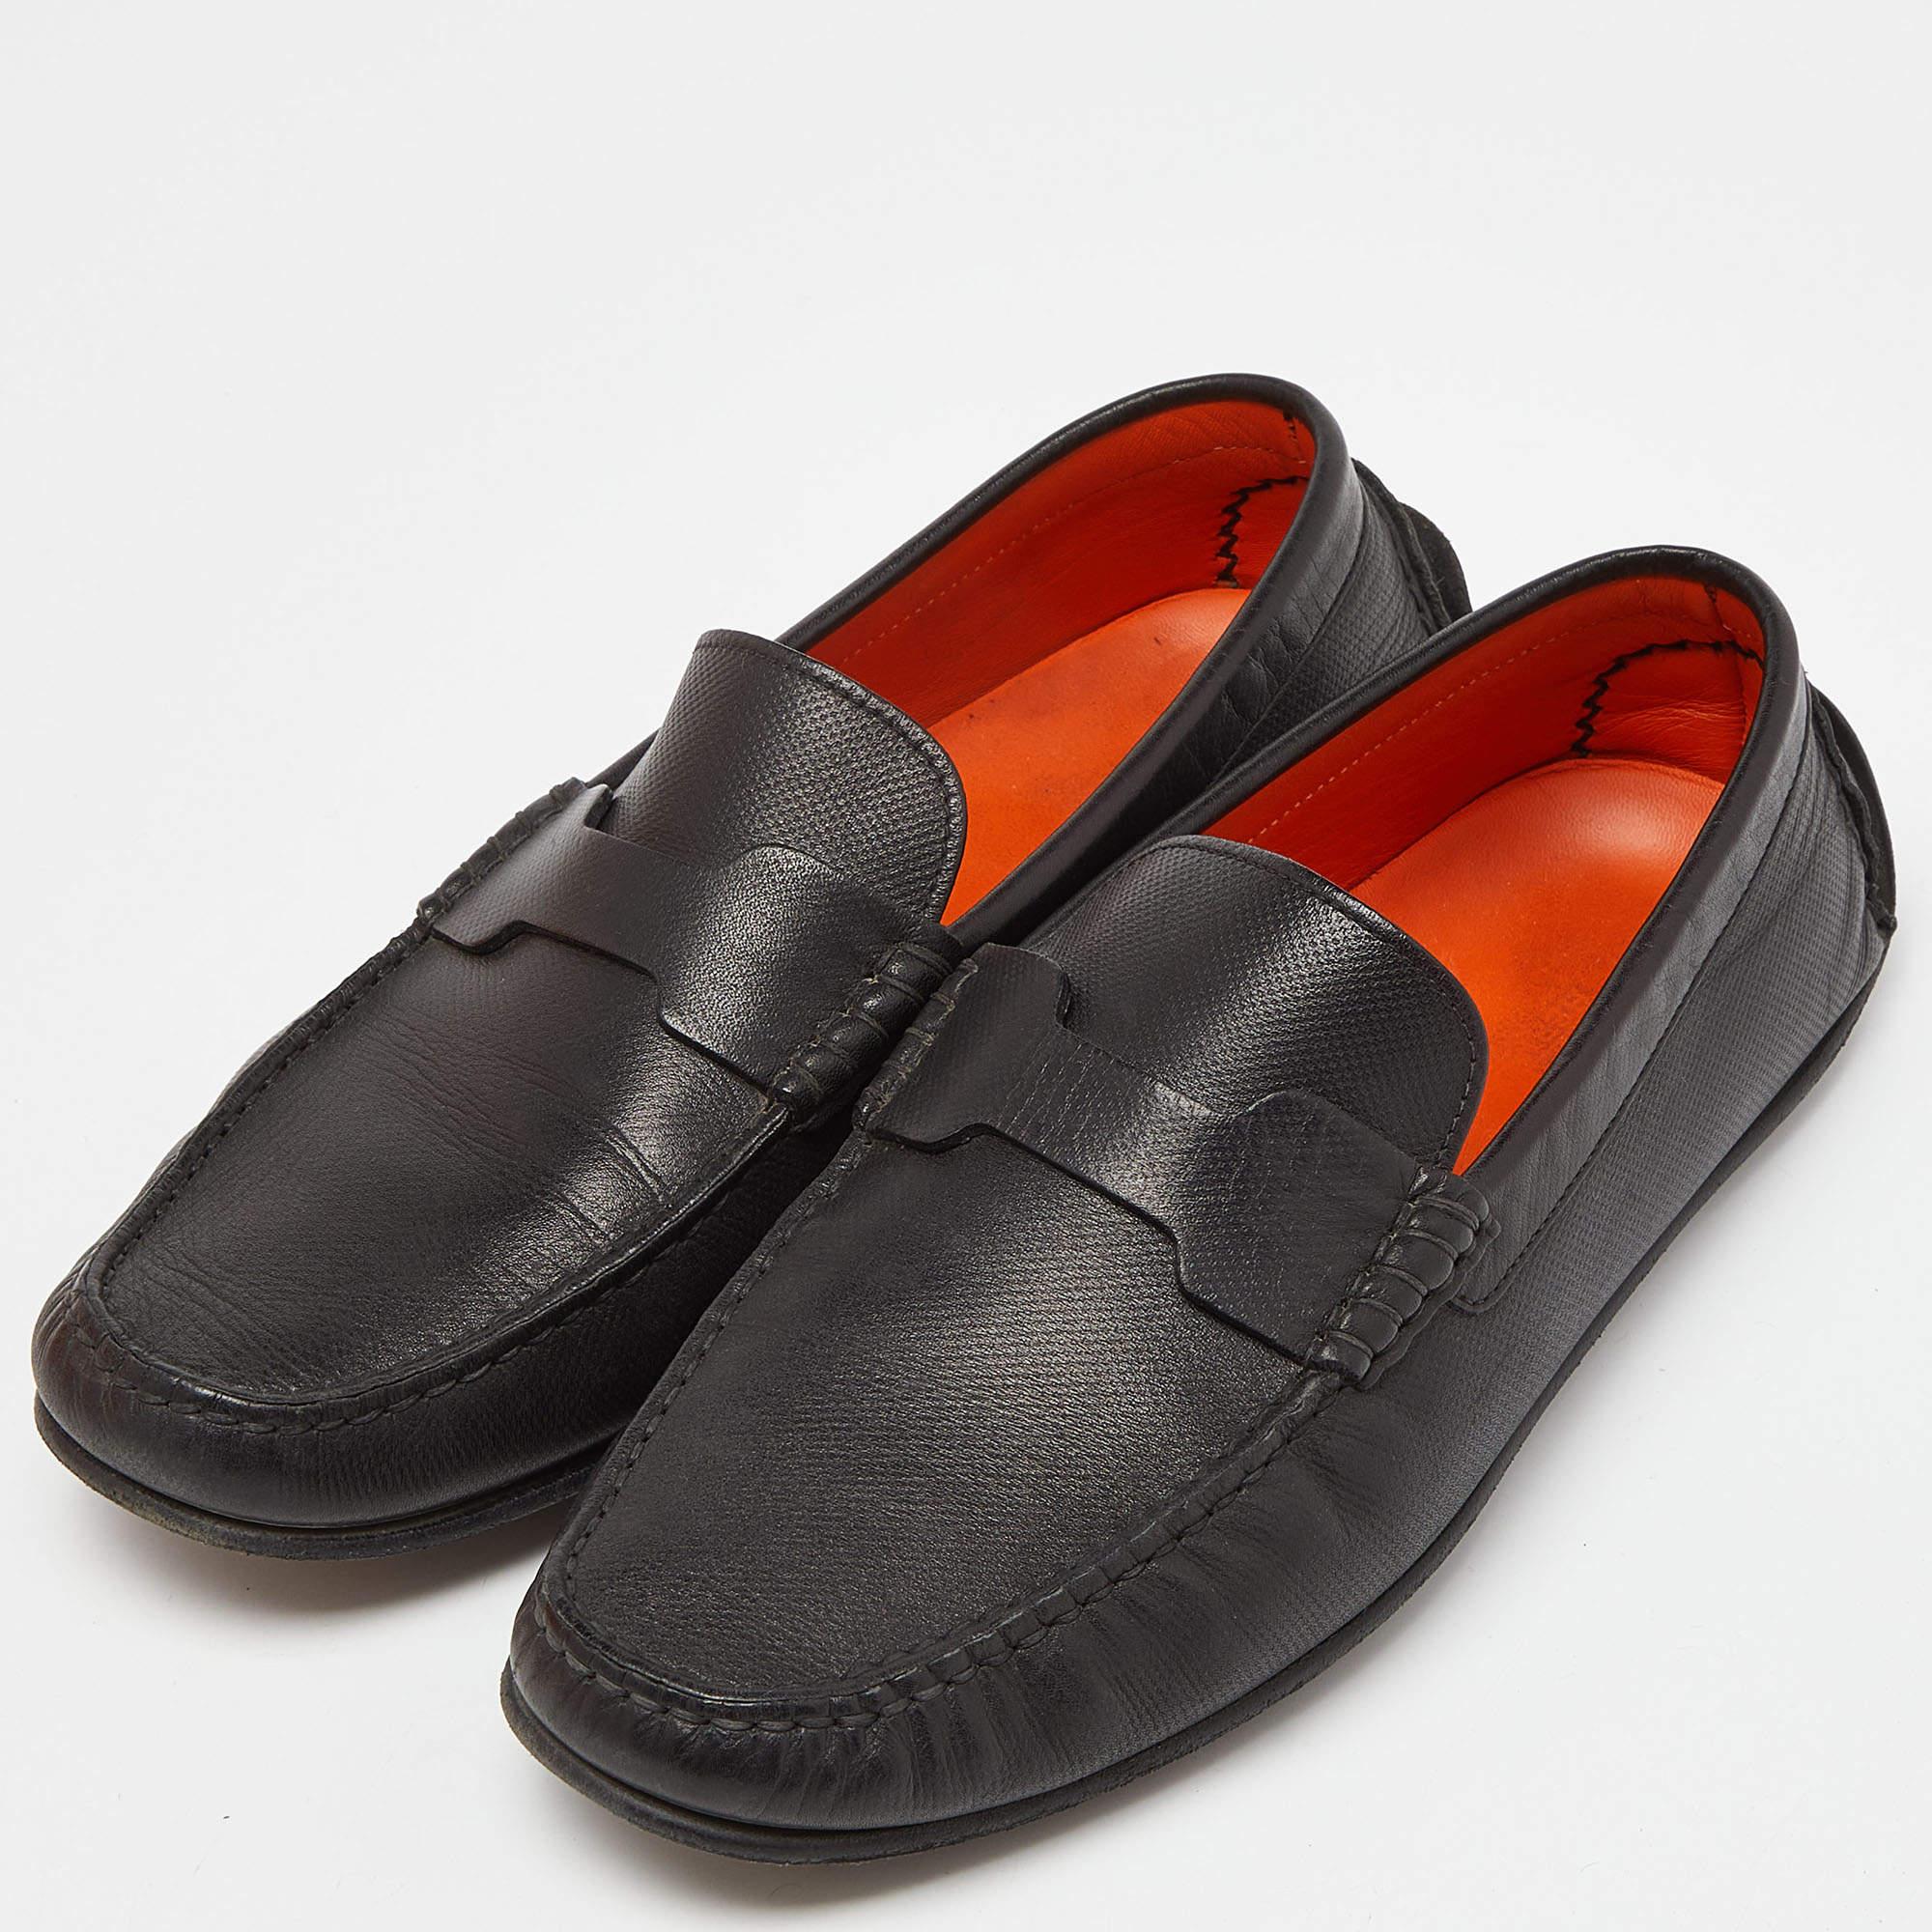 Hermes Black Leather Kennedy Slip On Loafers Size 40.5 For Sale 2